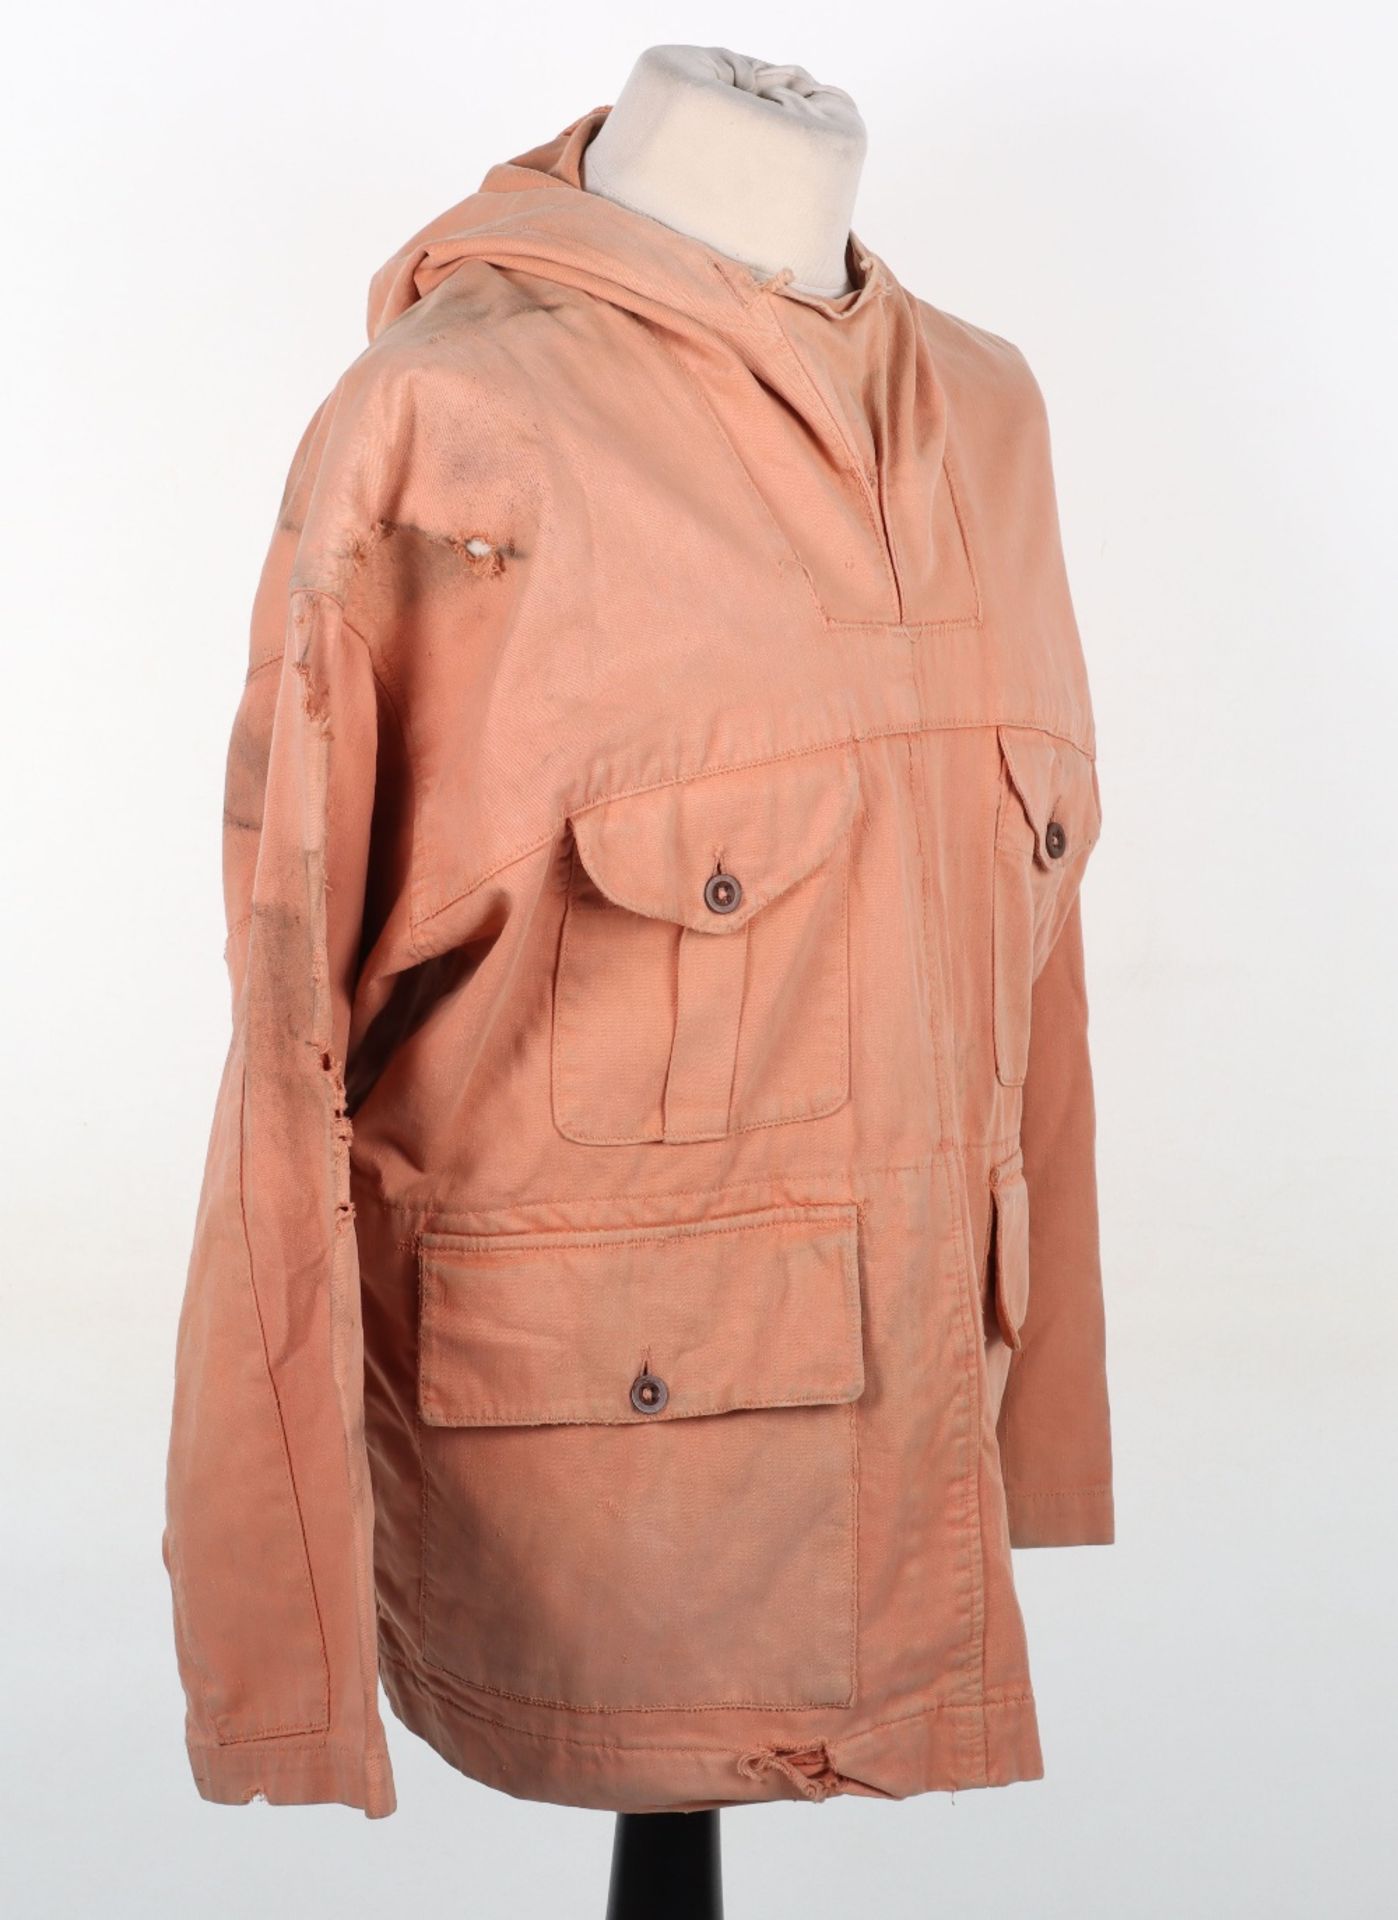 1942 British Snow Suit Dyed Pink for Wear in the North African Desert by the Long Range Desert Group - Image 3 of 6